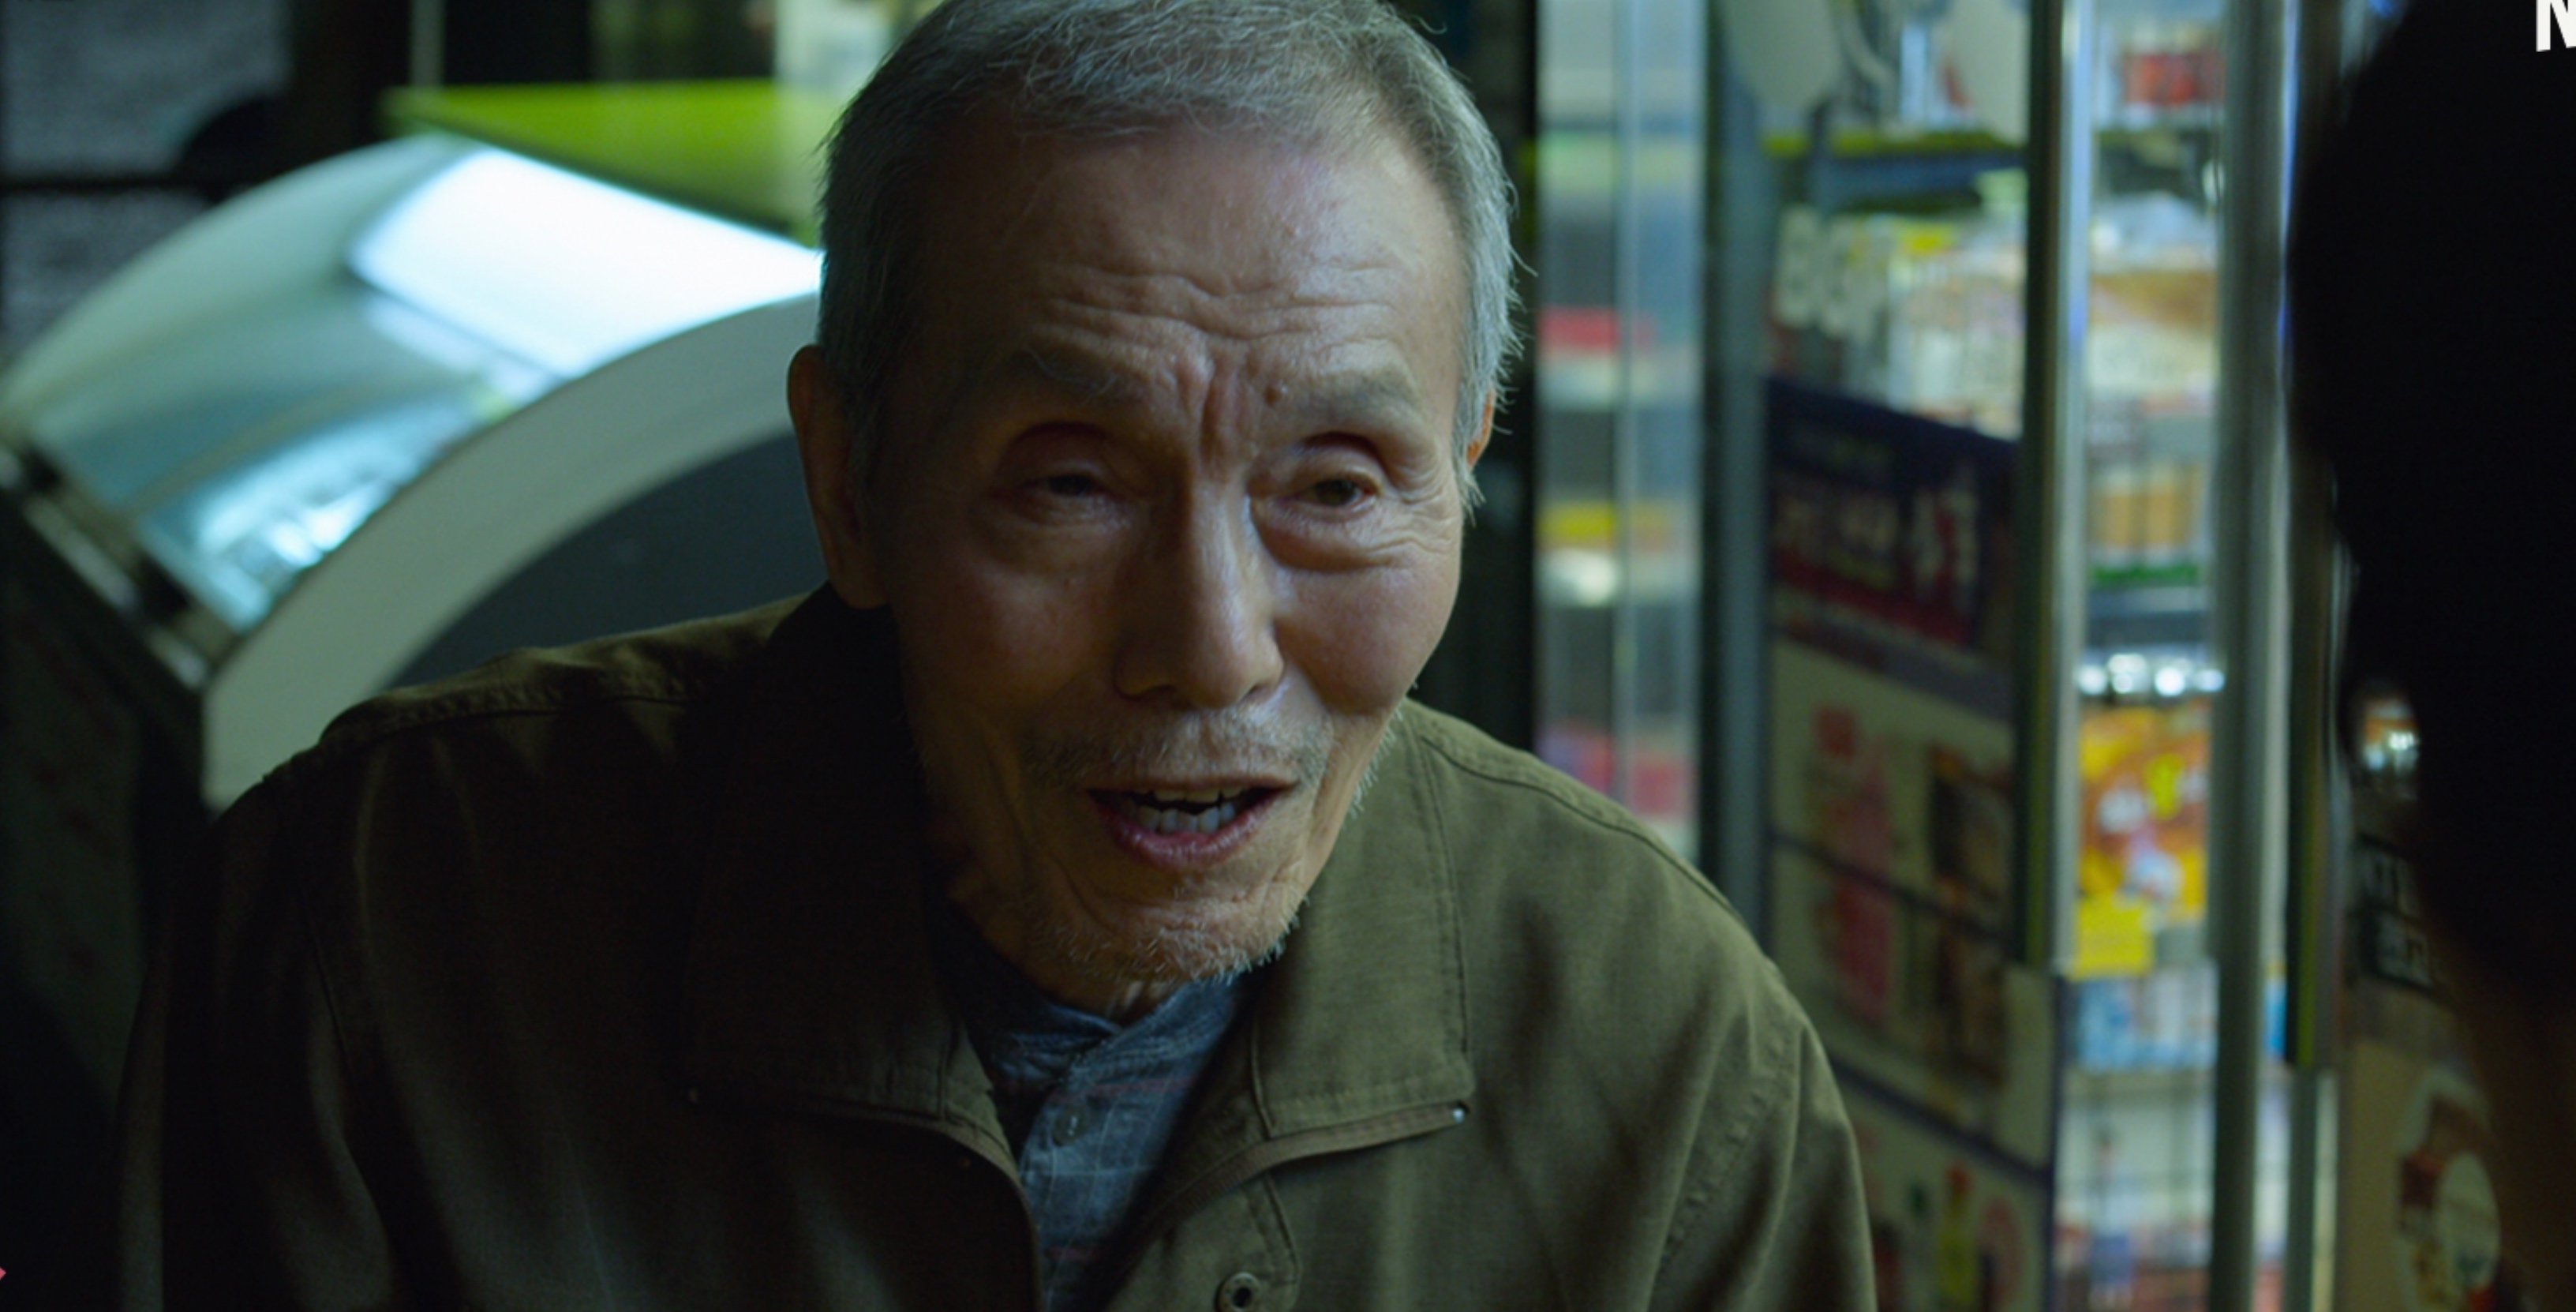 'Squid Game' Oh Yeong-su as Il-nam in front of convenience store